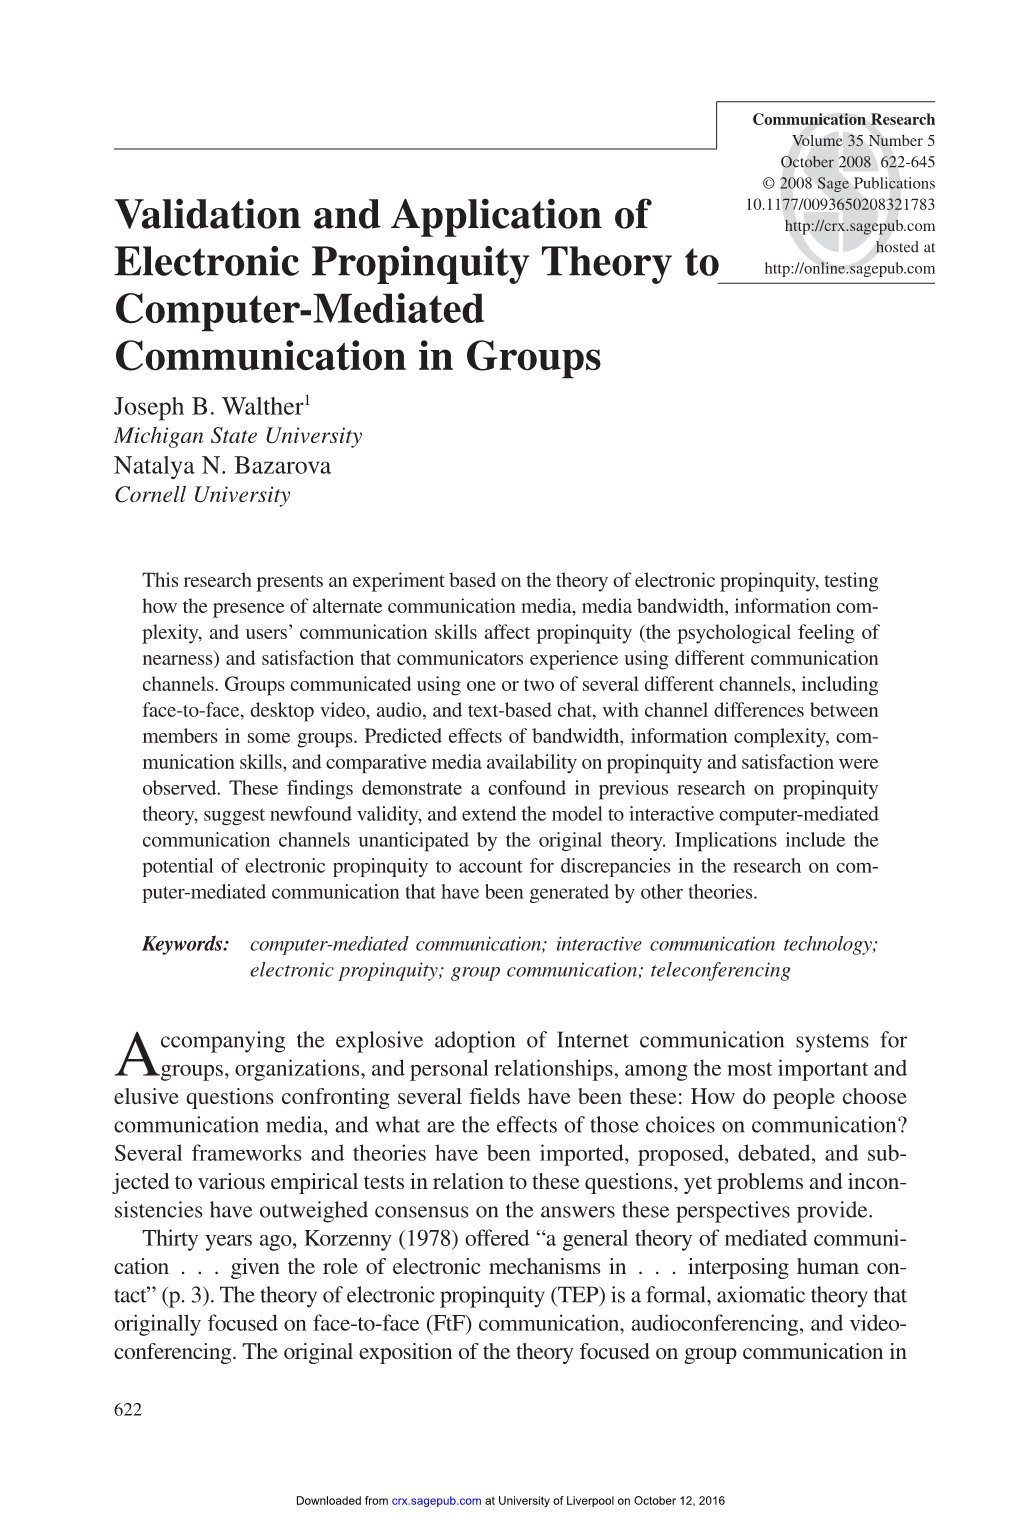 Validation and Application of Electronic Propinquity Theory to Computer-Mediated Communication in Groups